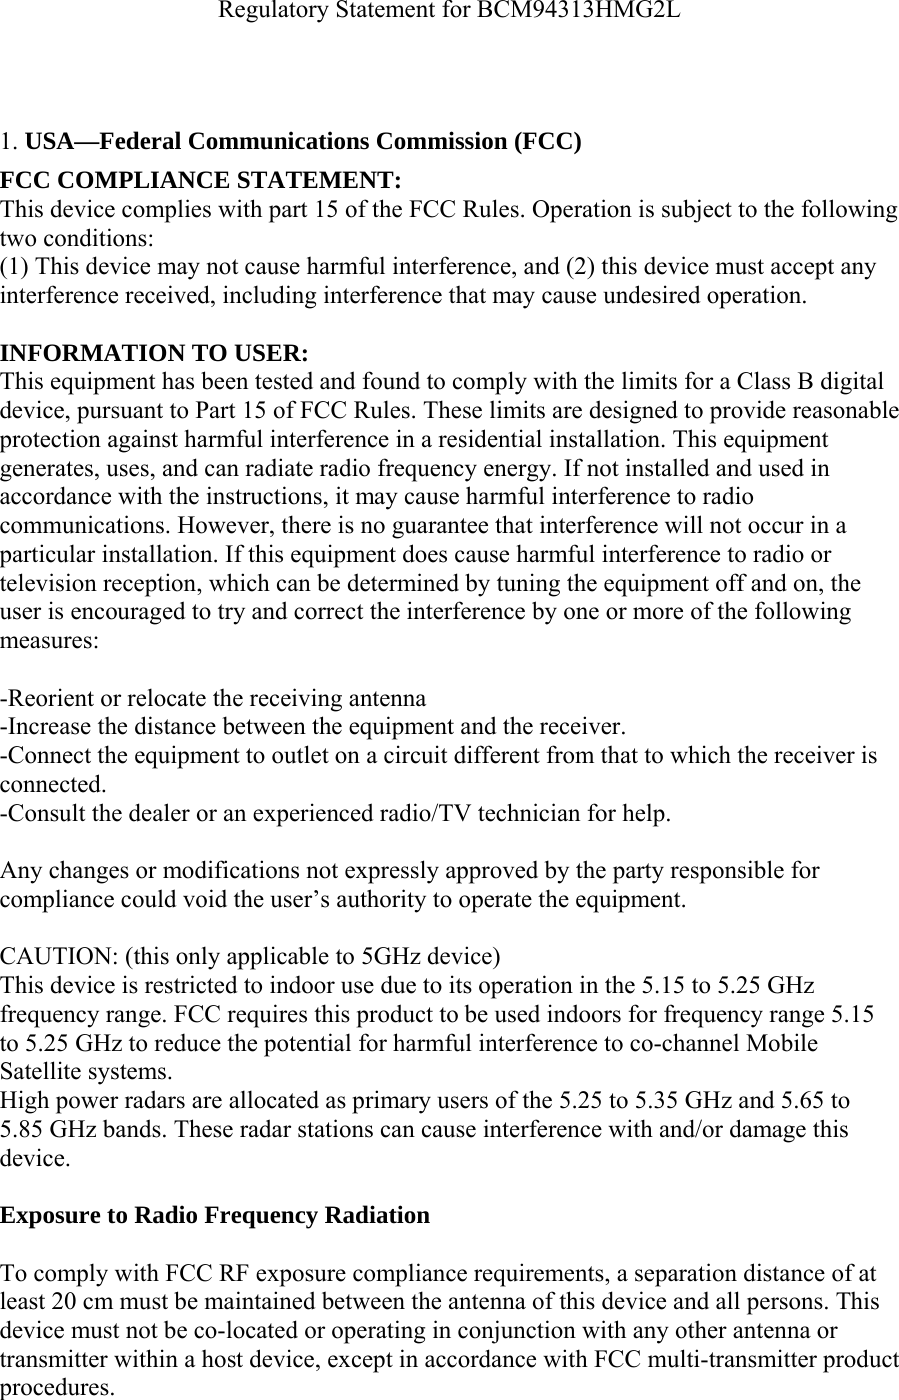 Regulatory Statement for BCM94313HMG2L     1. USA—Federal Communications Commission (FCC) FCC COMPLIANCE STATEMENT: This device complies with part 15 of the FCC Rules. Operation is subject to the following two conditions: (1) This device may not cause harmful interference, and (2) this device must accept any interference received, including interference that may cause undesired operation.  INFORMATION TO USER: This equipment has been tested and found to comply with the limits for a Class B digital device, pursuant to Part 15 of FCC Rules. These limits are designed to provide reasonable protection against harmful interference in a residential installation. This equipment generates, uses, and can radiate radio frequency energy. If not installed and used in accordance with the instructions, it may cause harmful interference to radio communications. However, there is no guarantee that interference will not occur in a particular installation. If this equipment does cause harmful interference to radio or television reception, which can be determined by tuning the equipment off and on, the user is encouraged to try and correct the interference by one or more of the following measures:   -Reorient or relocate the receiving antenna -Increase the distance between the equipment and the receiver. -Connect the equipment to outlet on a circuit different from that to which the receiver is connected. -Consult the dealer or an experienced radio/TV technician for help.  Any changes or modifications not expressly approved by the party responsible for compliance could void the user’s authority to operate the equipment.  CAUTION: (this only applicable to 5GHz device) This device is restricted to indoor use due to its operation in the 5.15 to 5.25 GHz frequency range. FCC requires this product to be used indoors for frequency range 5.15 to 5.25 GHz to reduce the potential for harmful interference to co-channel Mobile Satellite systems. High power radars are allocated as primary users of the 5.25 to 5.35 GHz and 5.65 to 5.85 GHz bands. These radar stations can cause interference with and/or damage this device.  Exposure to Radio Frequency Radiation  To comply with FCC RF exposure compliance requirements, a separation distance of at least 20 cm must be maintained between the antenna of this device and all persons. This device must not be co-located or operating in conjunction with any other antenna or transmitter within a host device, except in accordance with FCC multi-transmitter product procedures. 